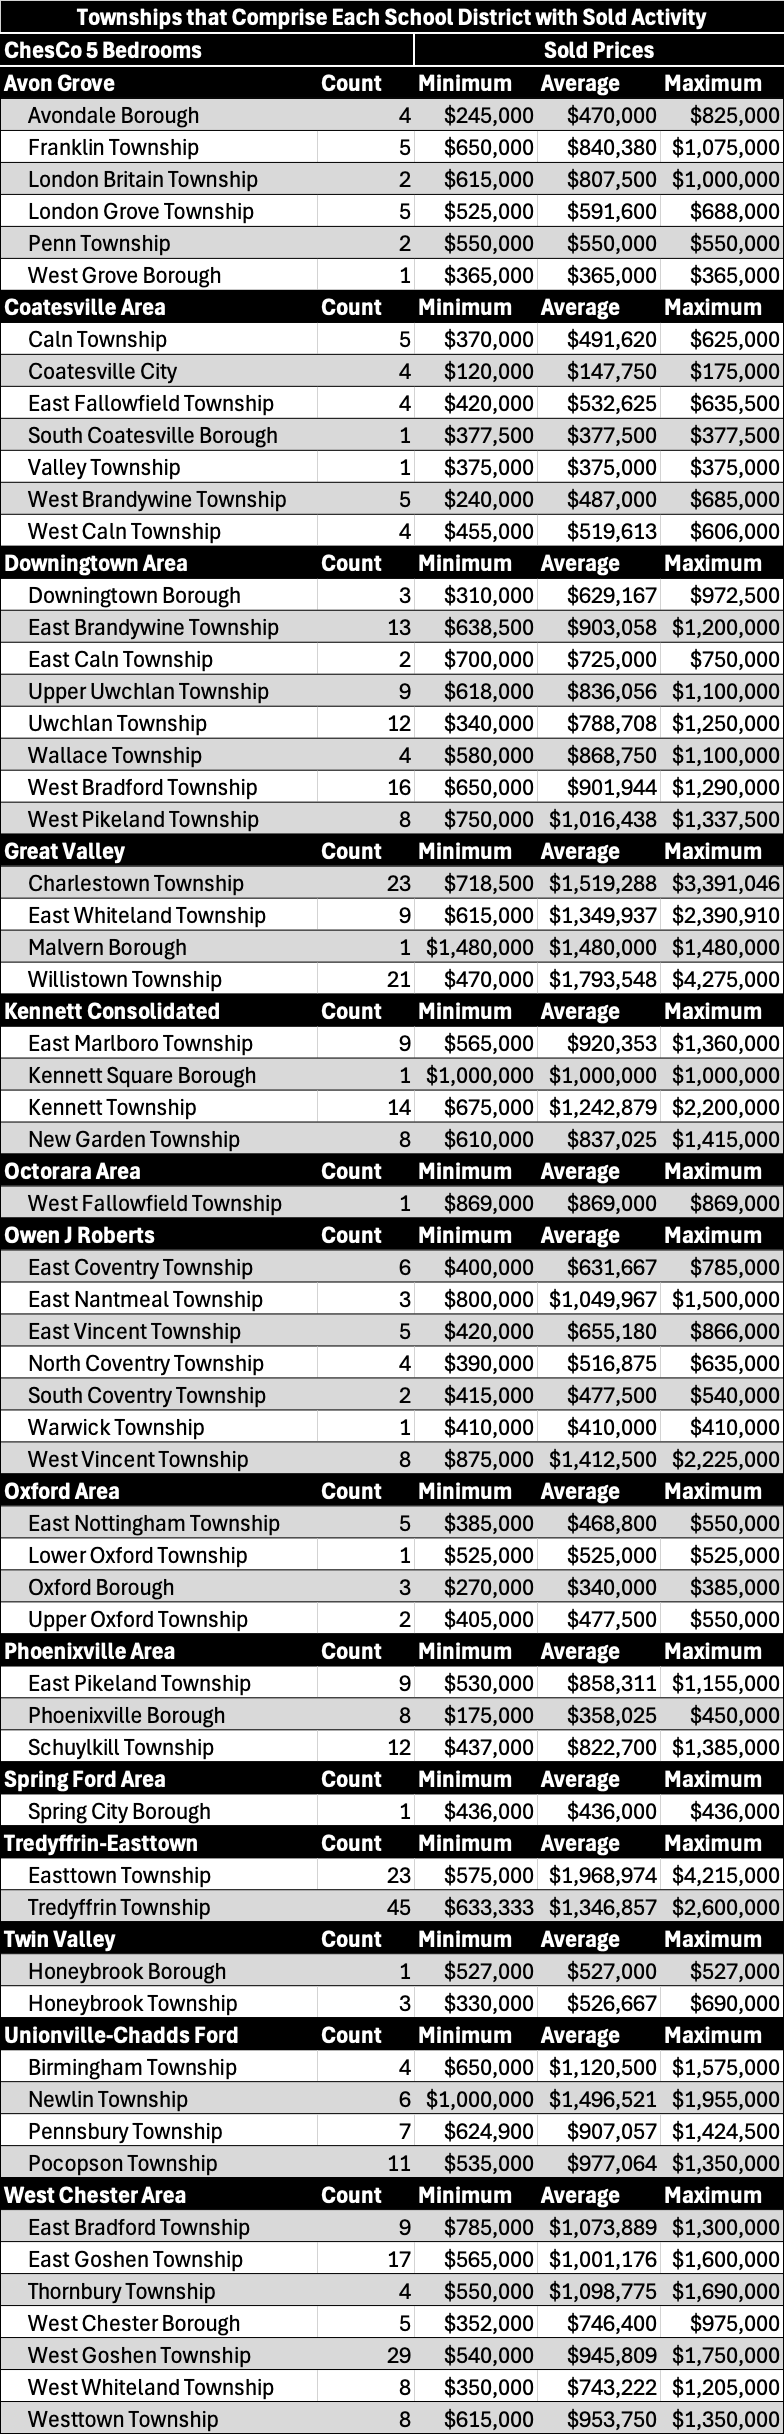 A table of each township within each School District in Chester County, PA for studios and 5 bedrooms, which includes the number of transactions and each township's corresponding sold prices displayed as minimum, average and maximum. 